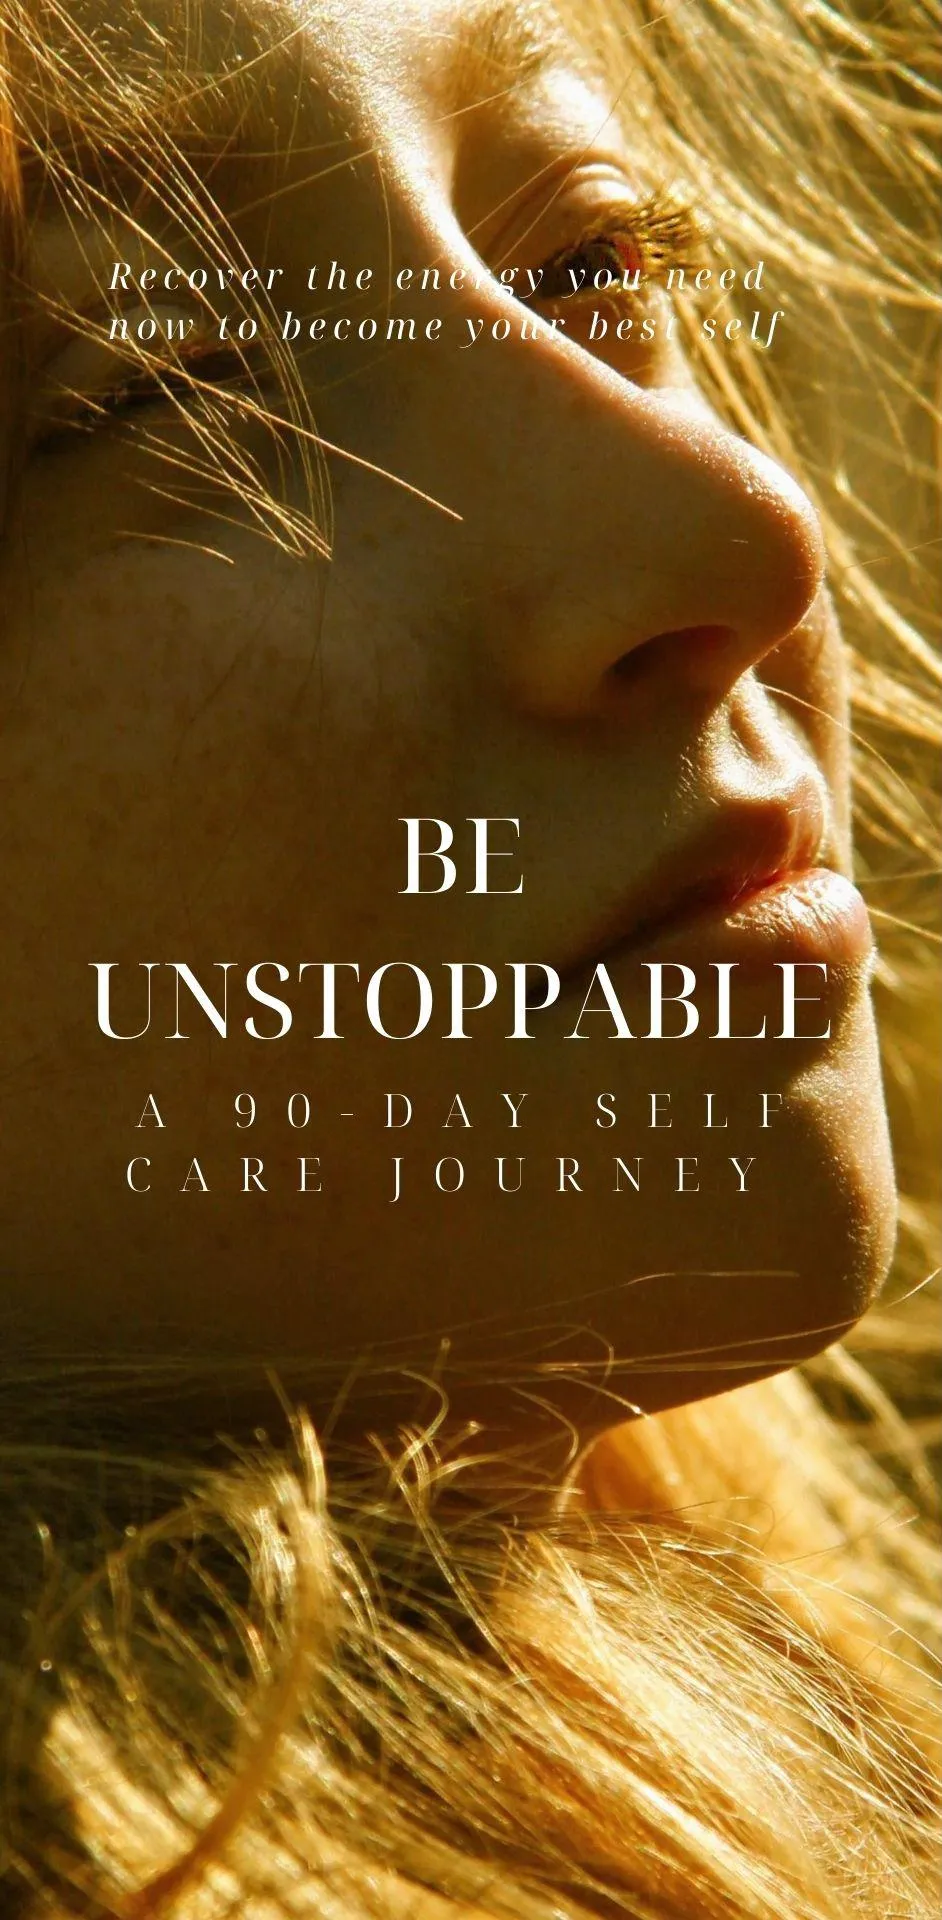 Image of "Be Unstoppable"